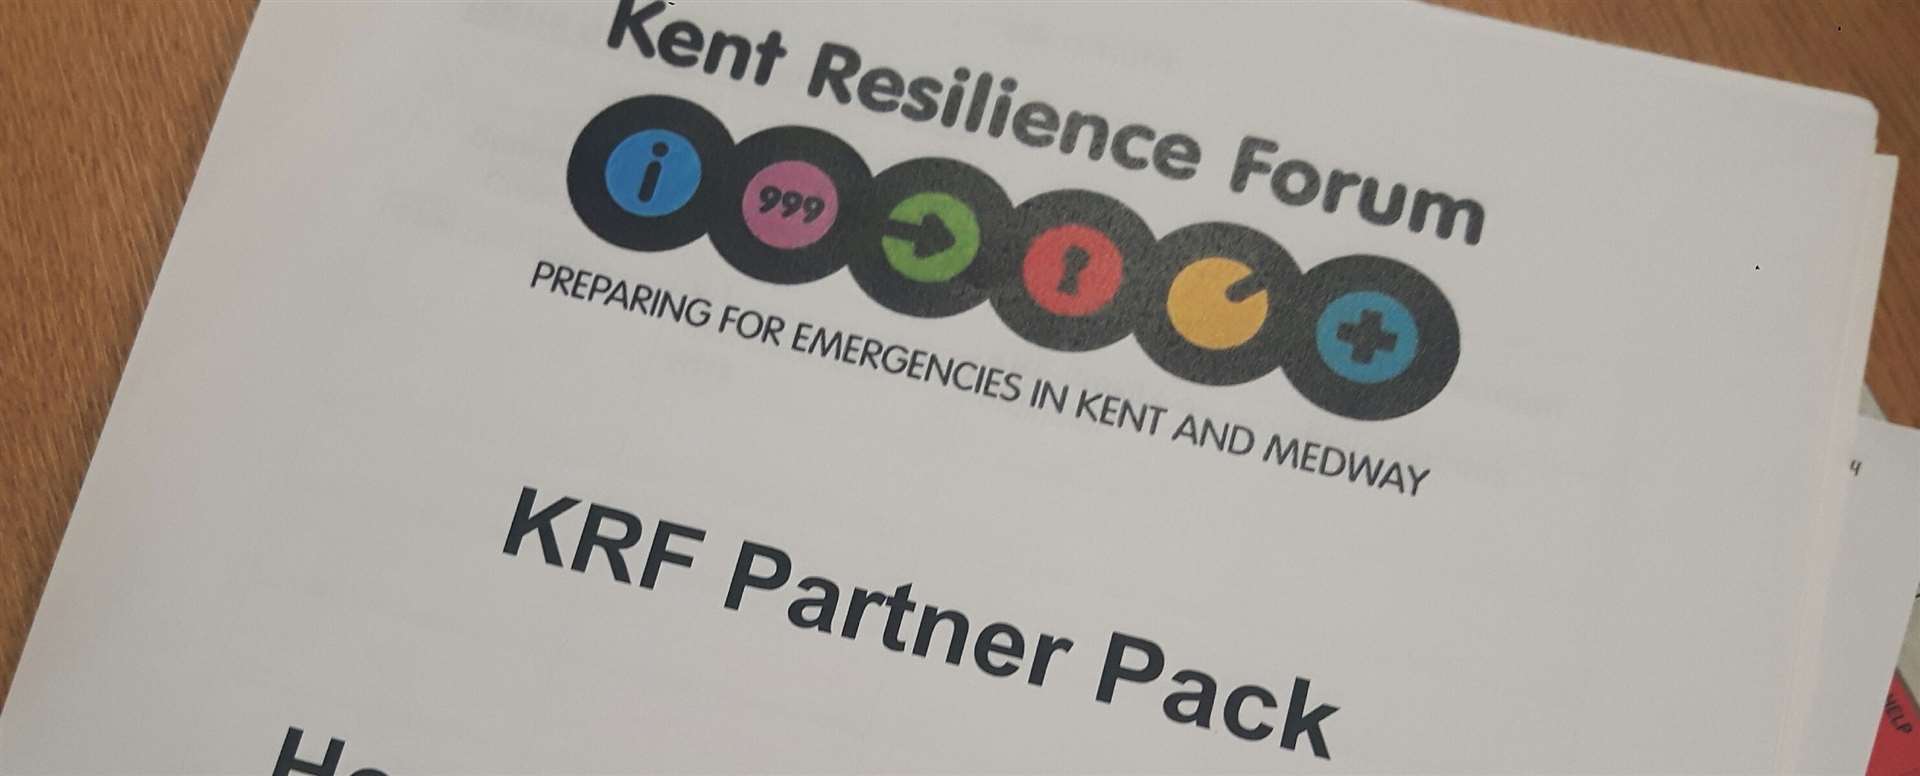 The Kent Resilience Forum took part in the exercise. Stock picture